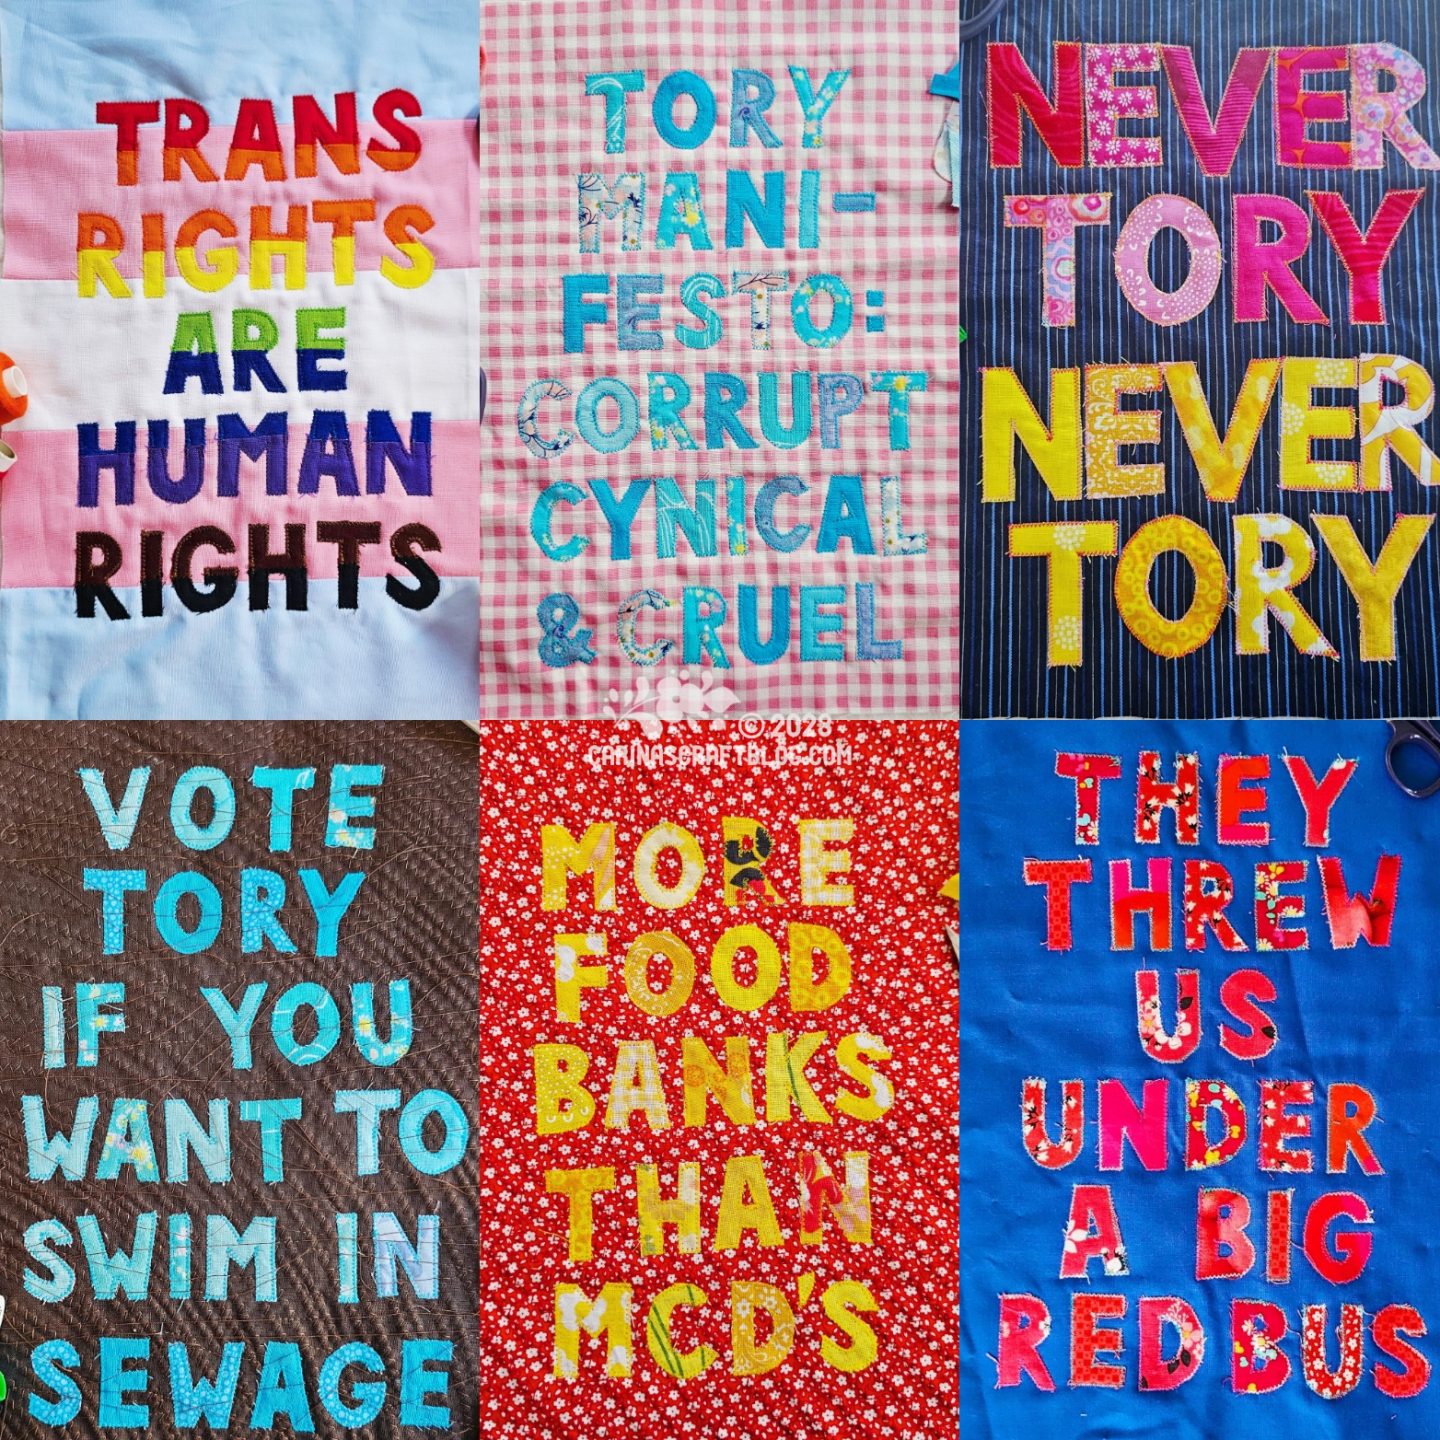 A collage of six images of pieces with appliquéd writing. Clockwise from top left: trans rights are human rights; Tory manifesto: corrupt, cynical and cruel; never Tony, never Tory; They threw us under a big red bus; more food banks than mcd's; vote Tory if you want to swim in sewage.